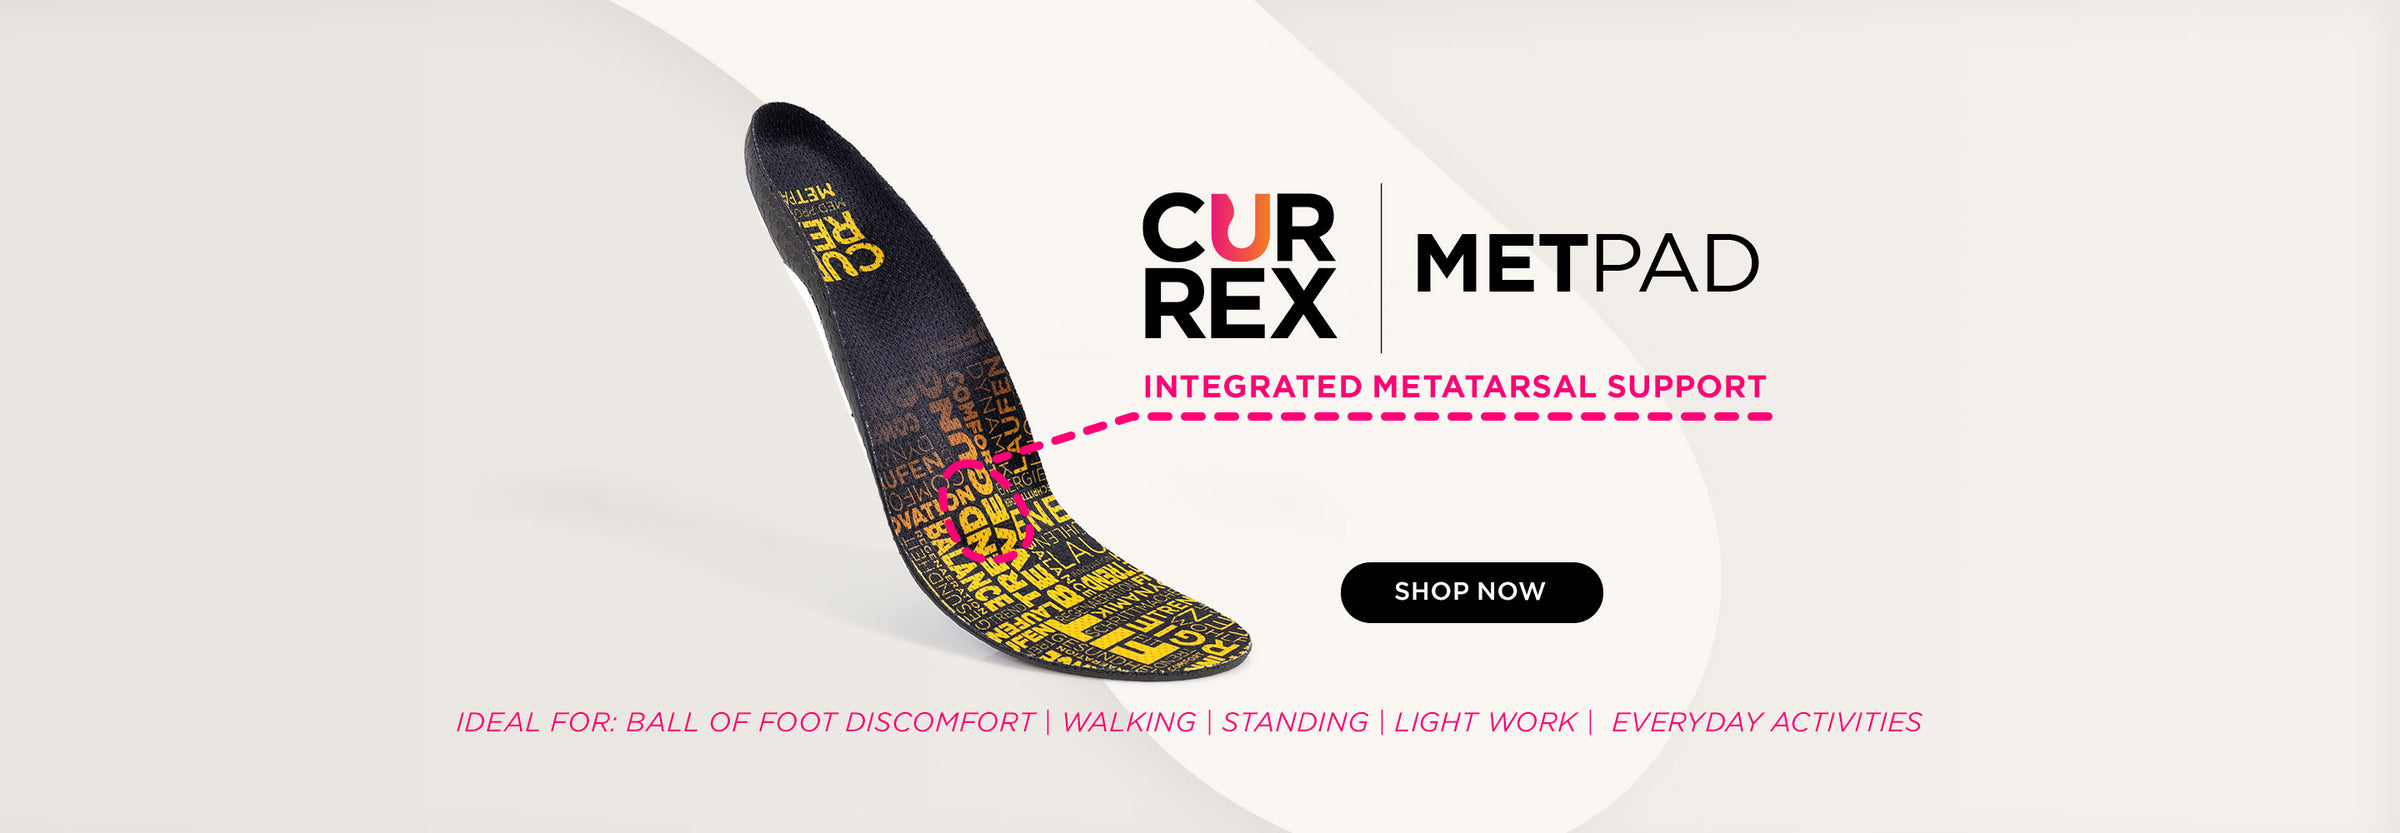 New Product: CURREX METPAD with integrated metatarsal support. Ideal for ball of foot discomfort, walking, standing, light work, and everyday activities.